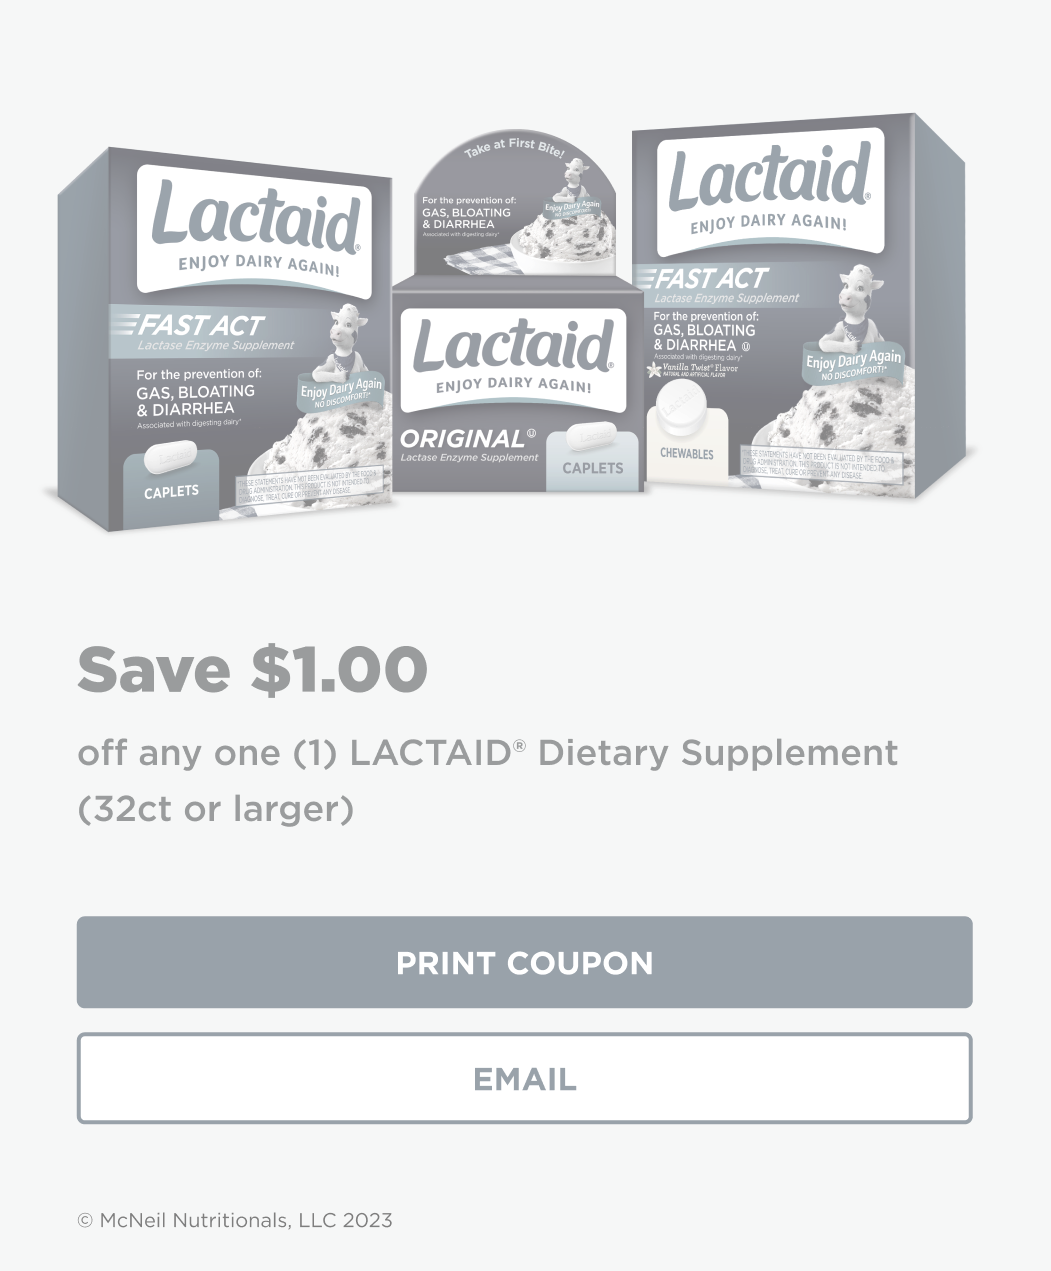 Disabled coupon for $1 off LACTAID® Dietary Supplementes